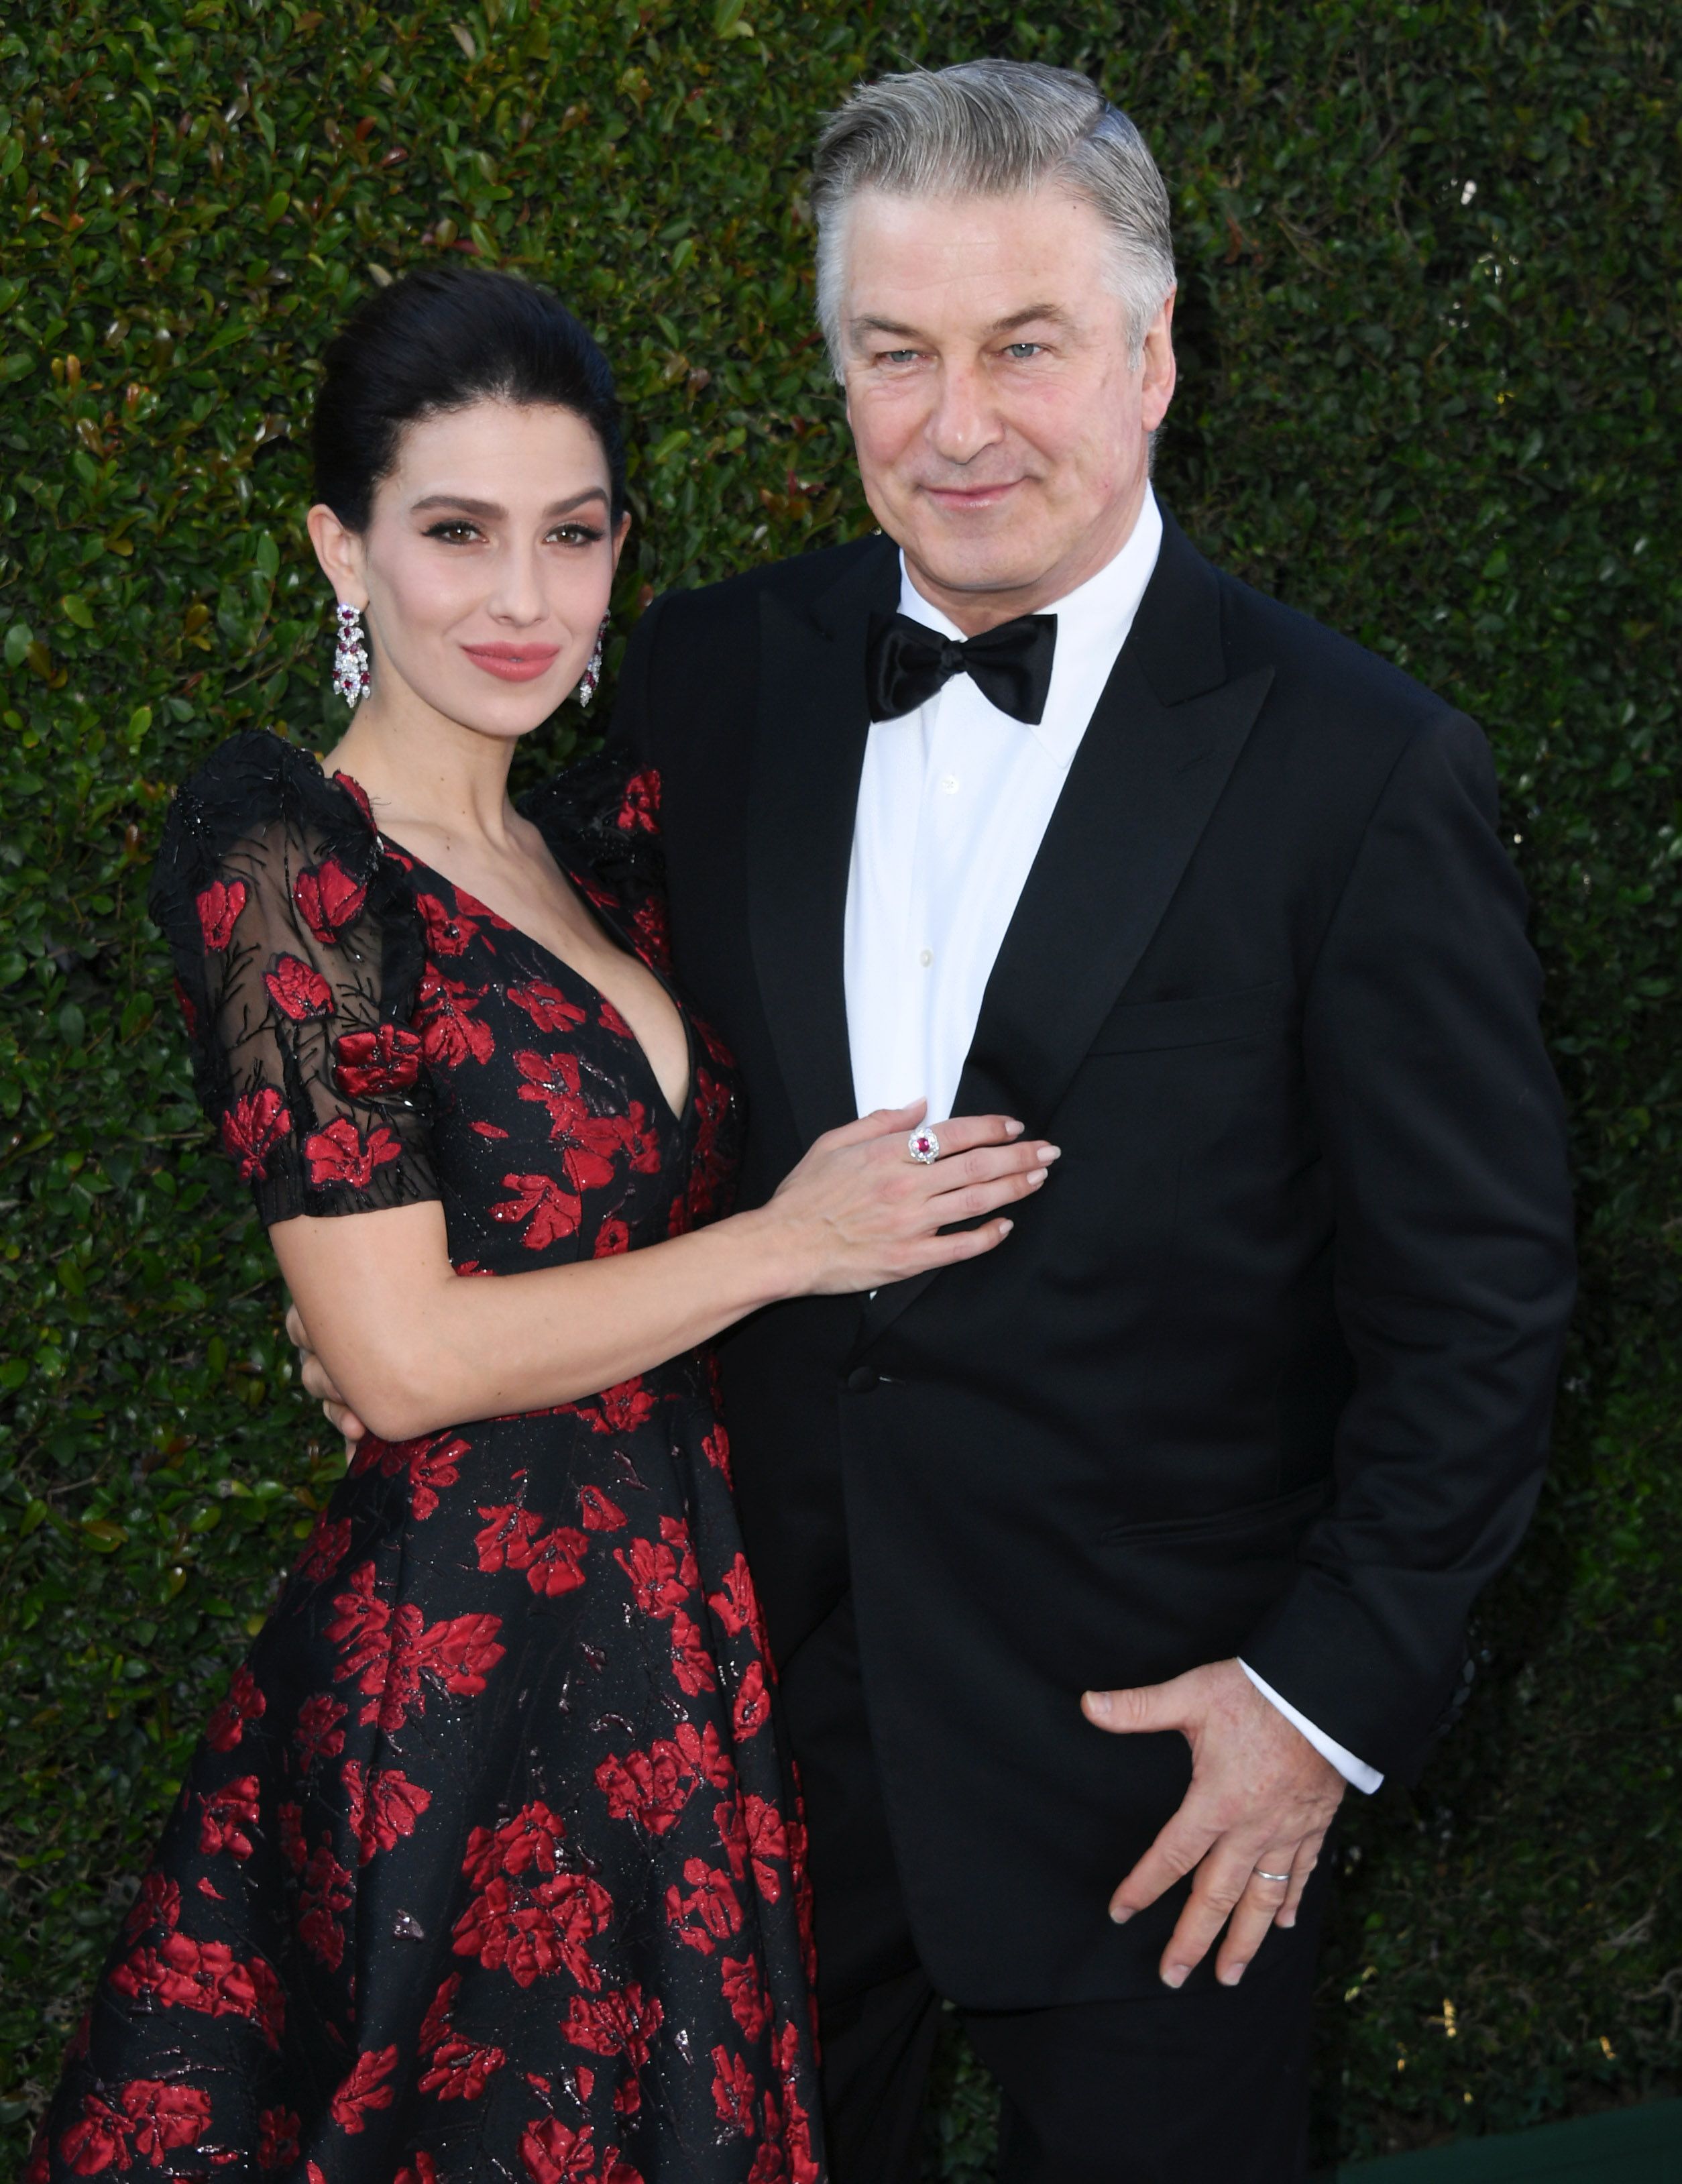 Hilaria and Alec Baldwin at the 25th Annual Screen Actors Guild Awards on January 27, 2019, in Los Angeles, California | Photo: Jon Kopaloff/Getty Images